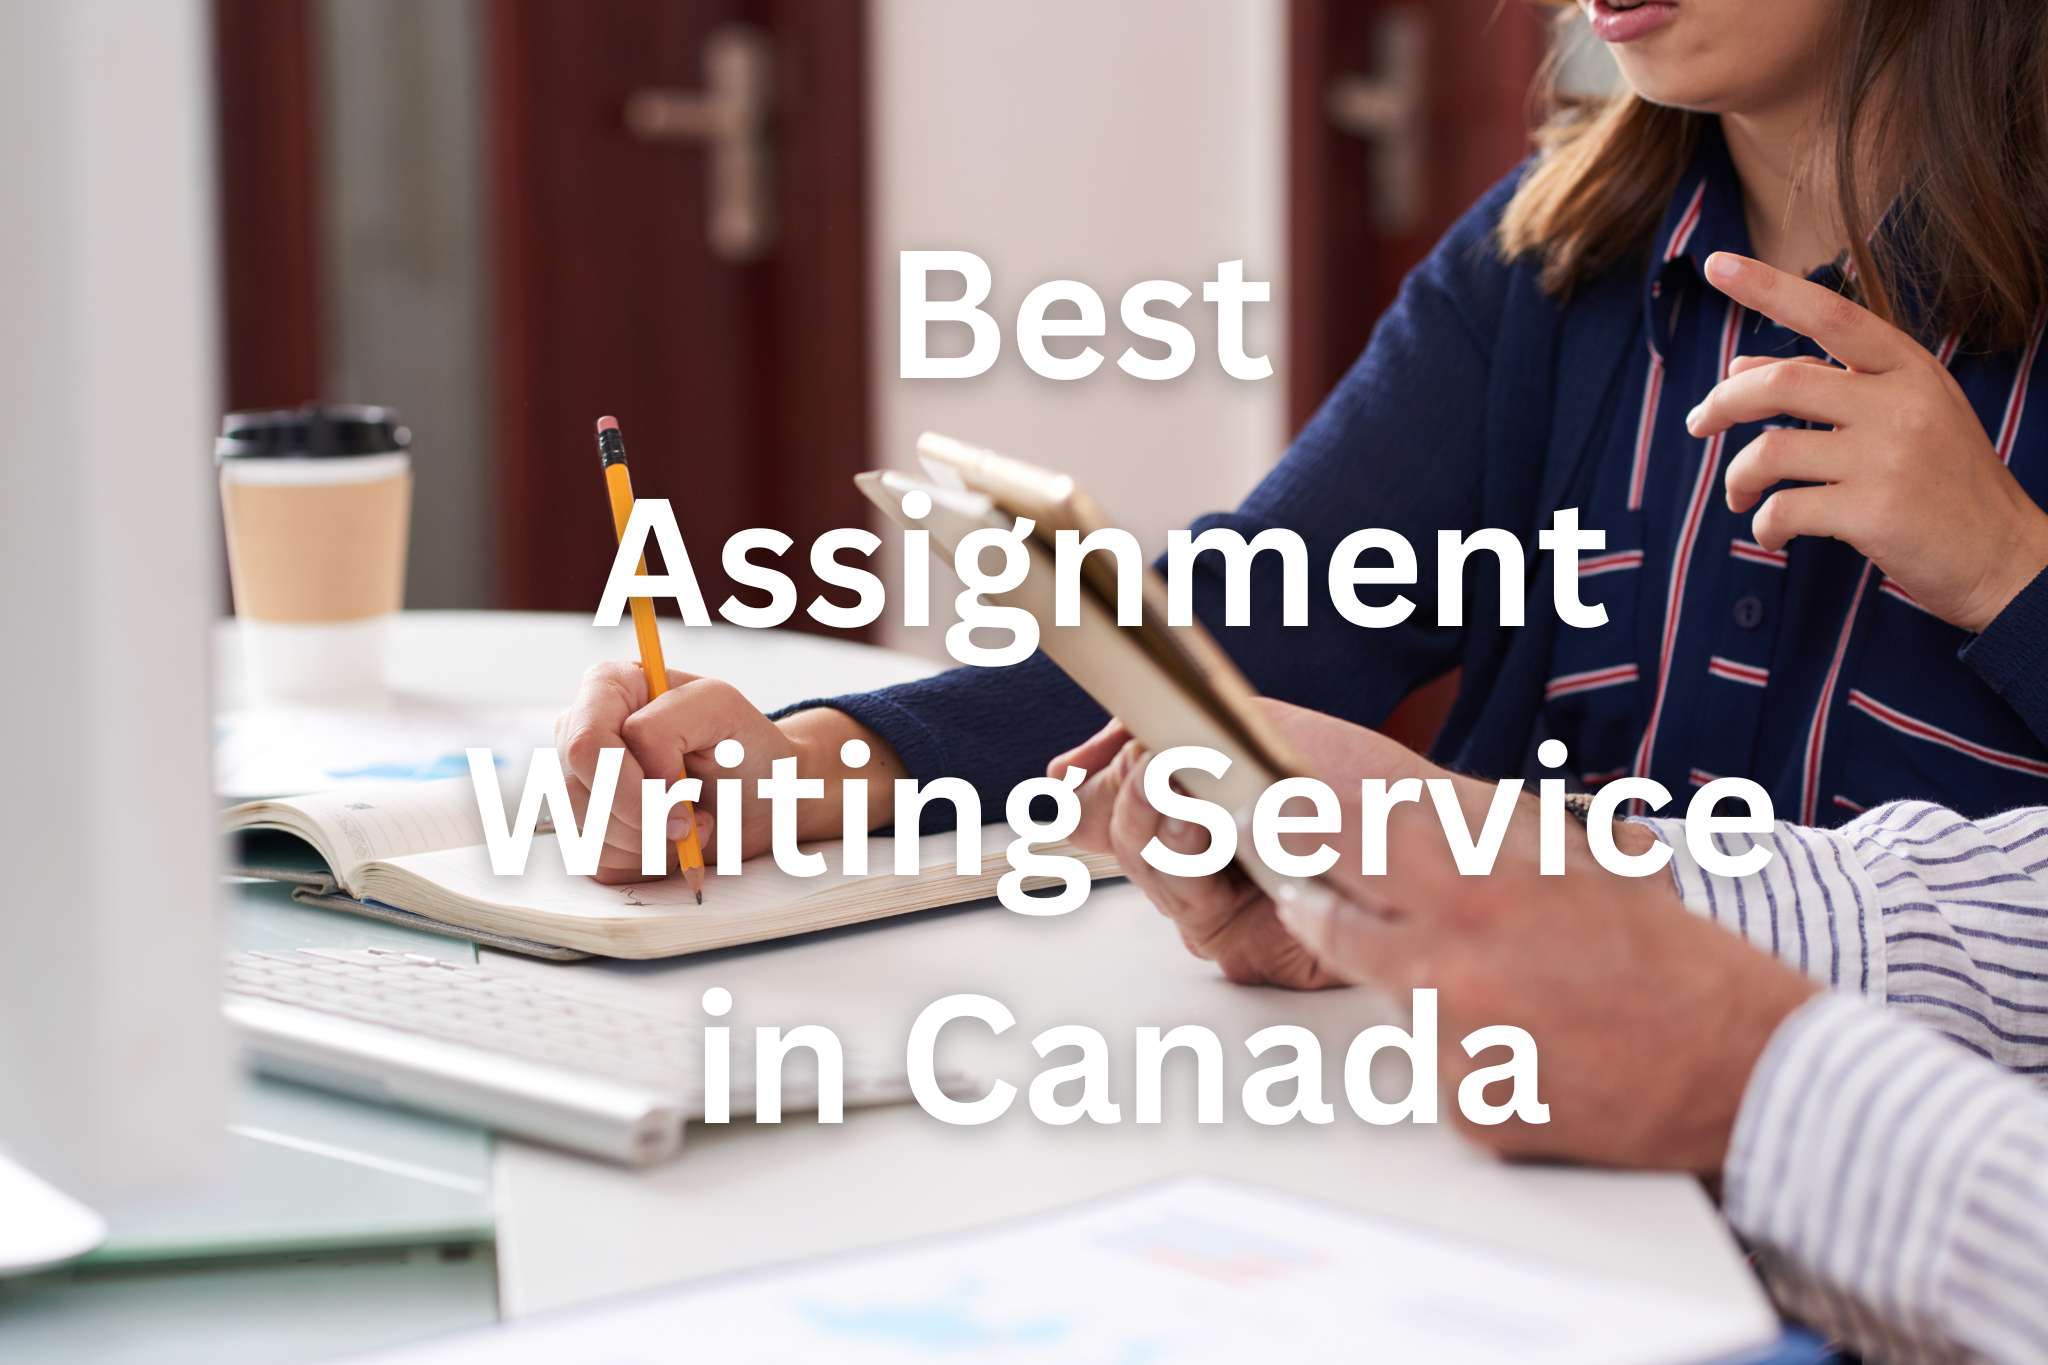 best-assignment-writing-service-in-canada